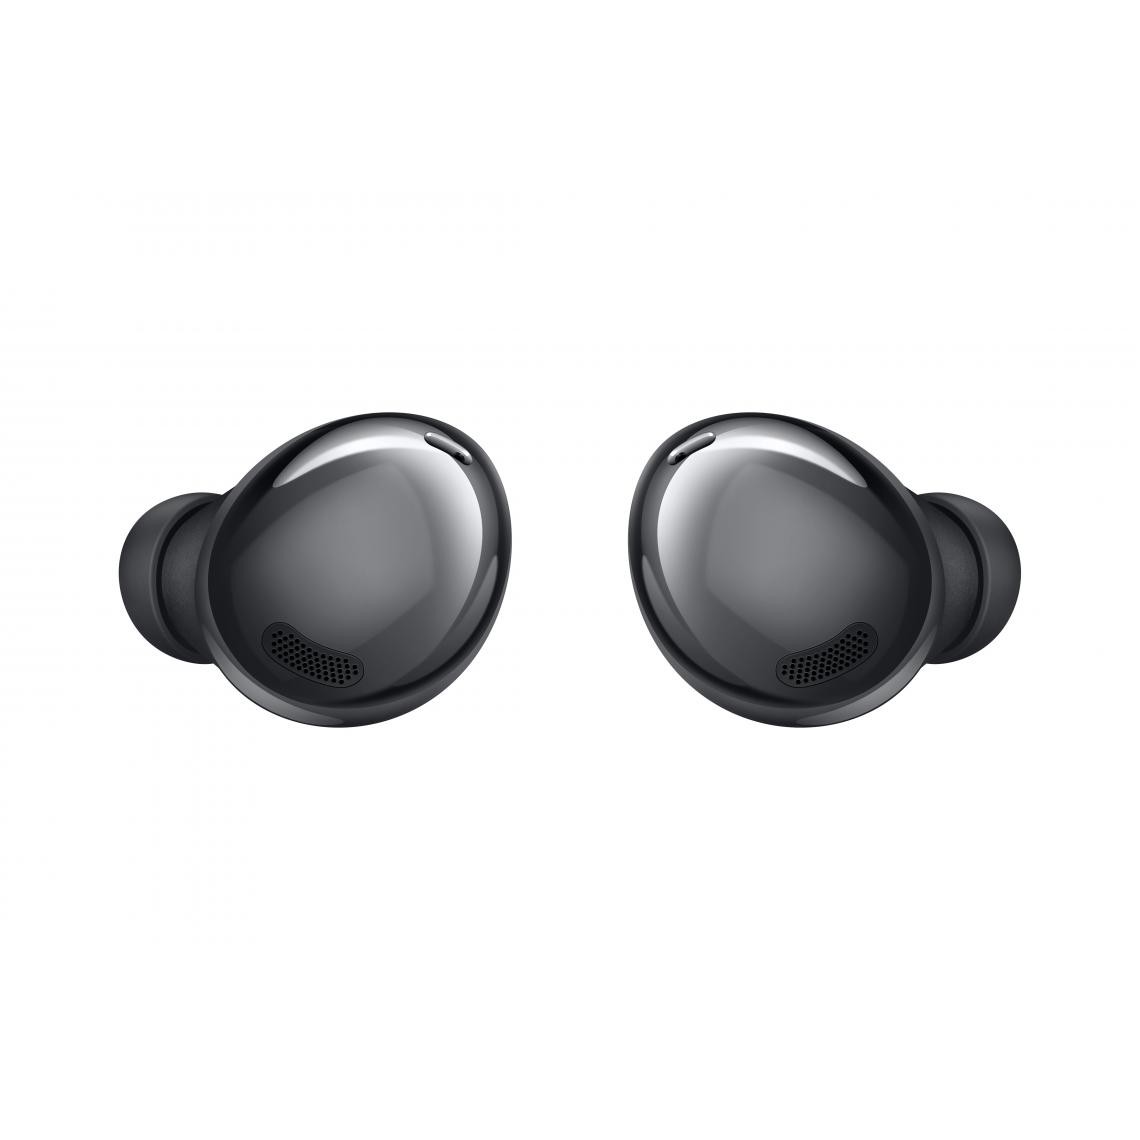 Samsung - Galaxy Buds Pro Noir - Ecouteurs intra-auriculaires